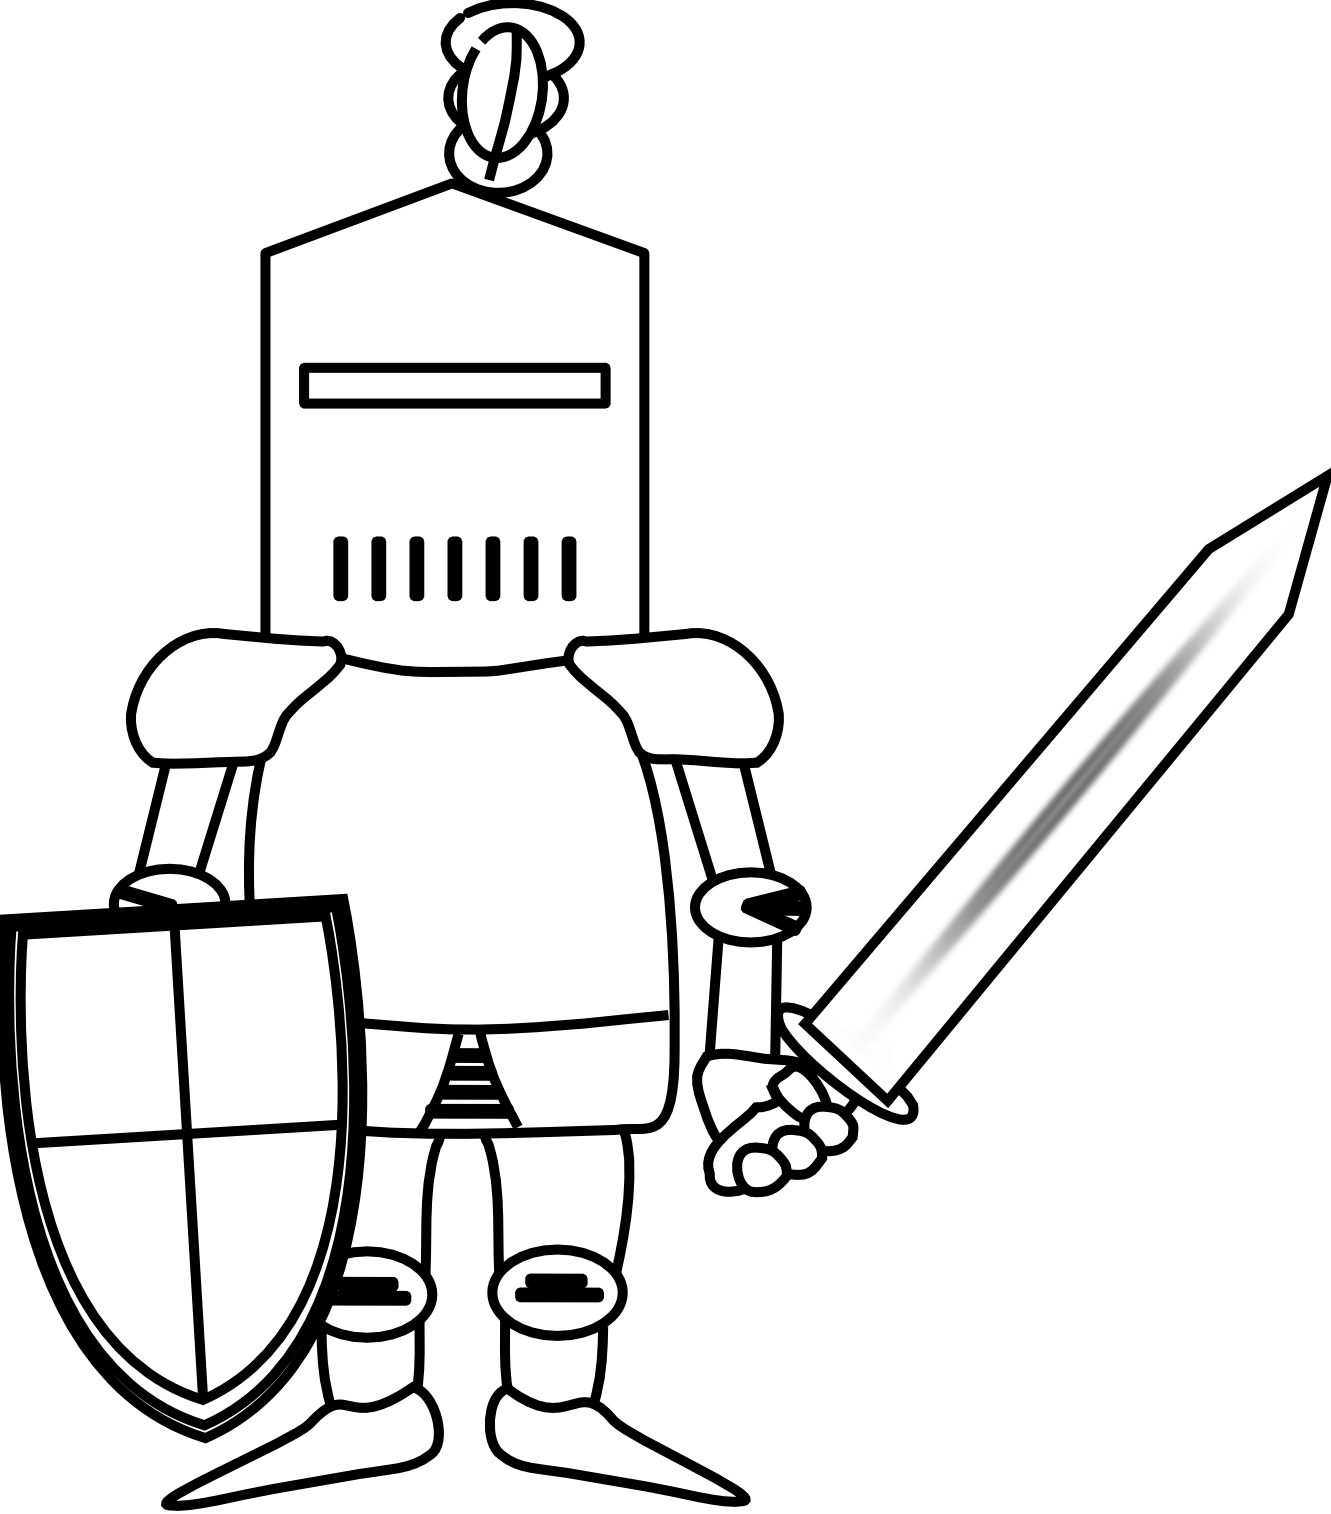 Knight clip art free clipart images